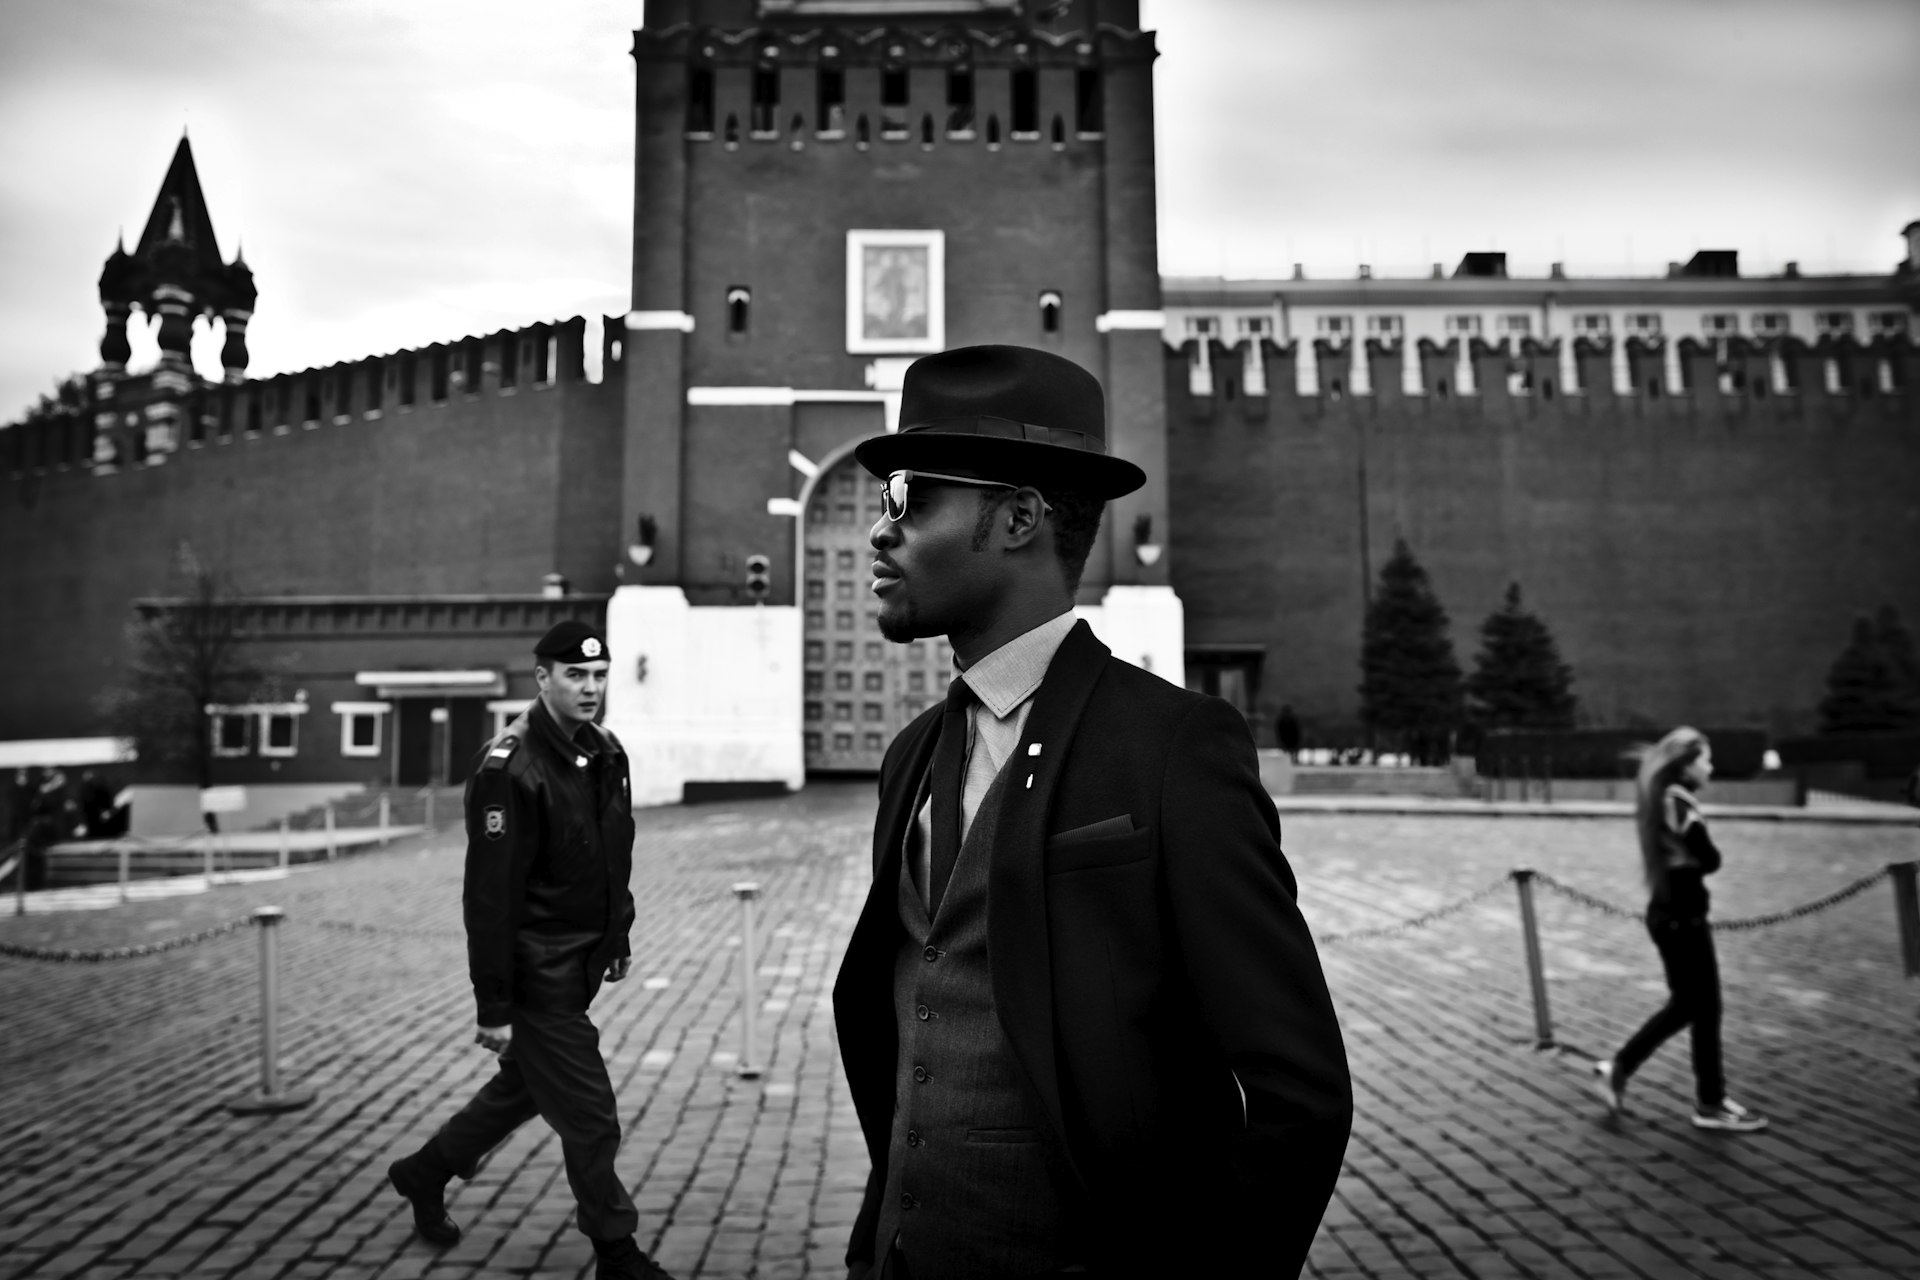 Photography Arteh Odjidja, Red Square Moscow, Russia, 2012, from the series Stranger in Moscow